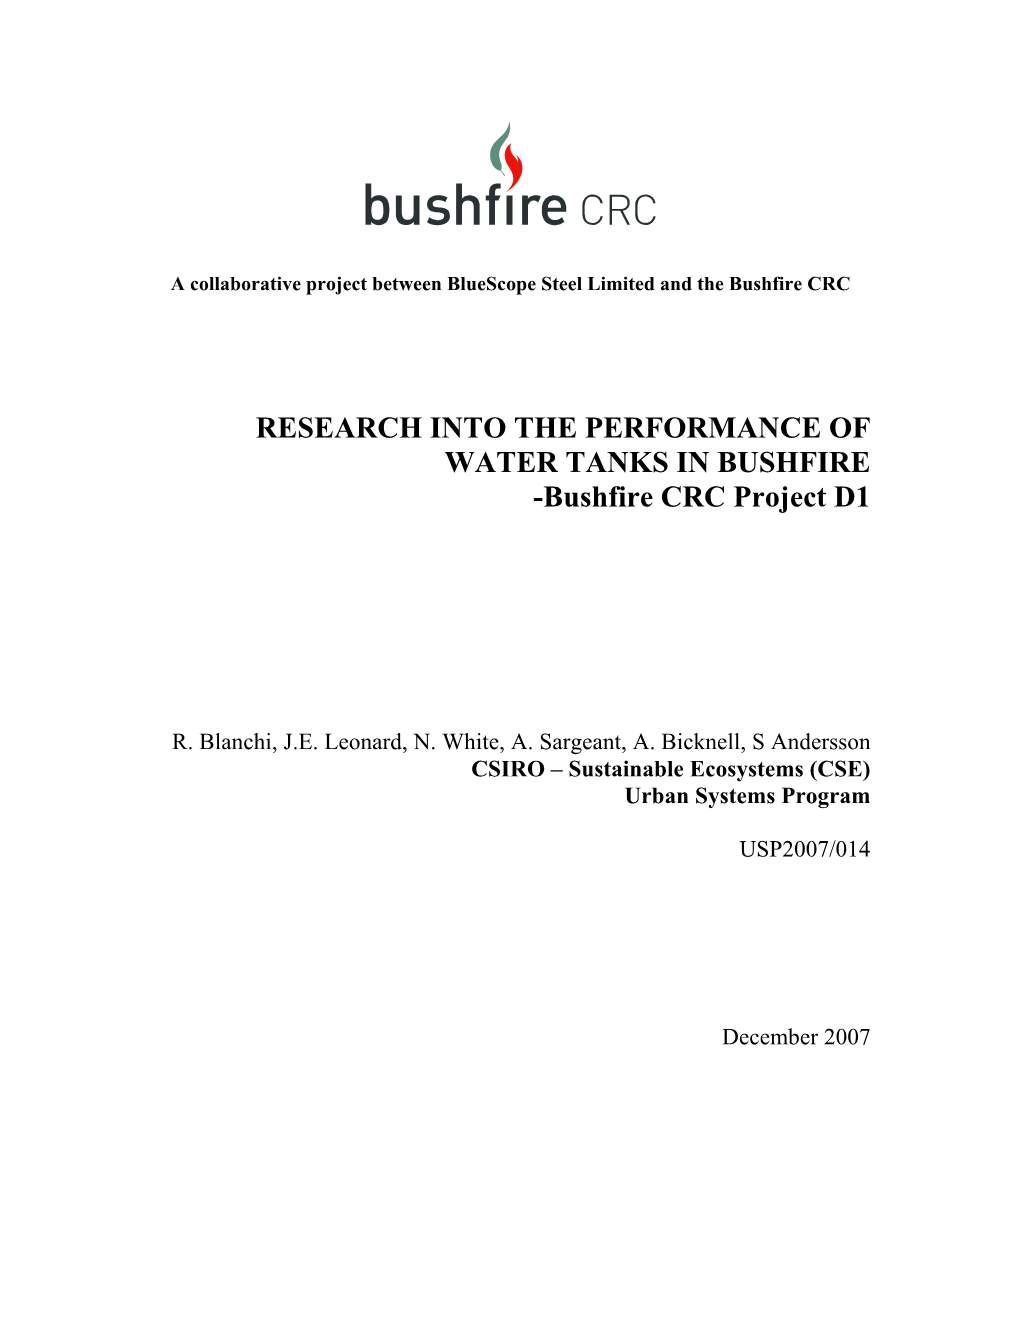 Research Into the Performance of Water Tanks in Bushfires